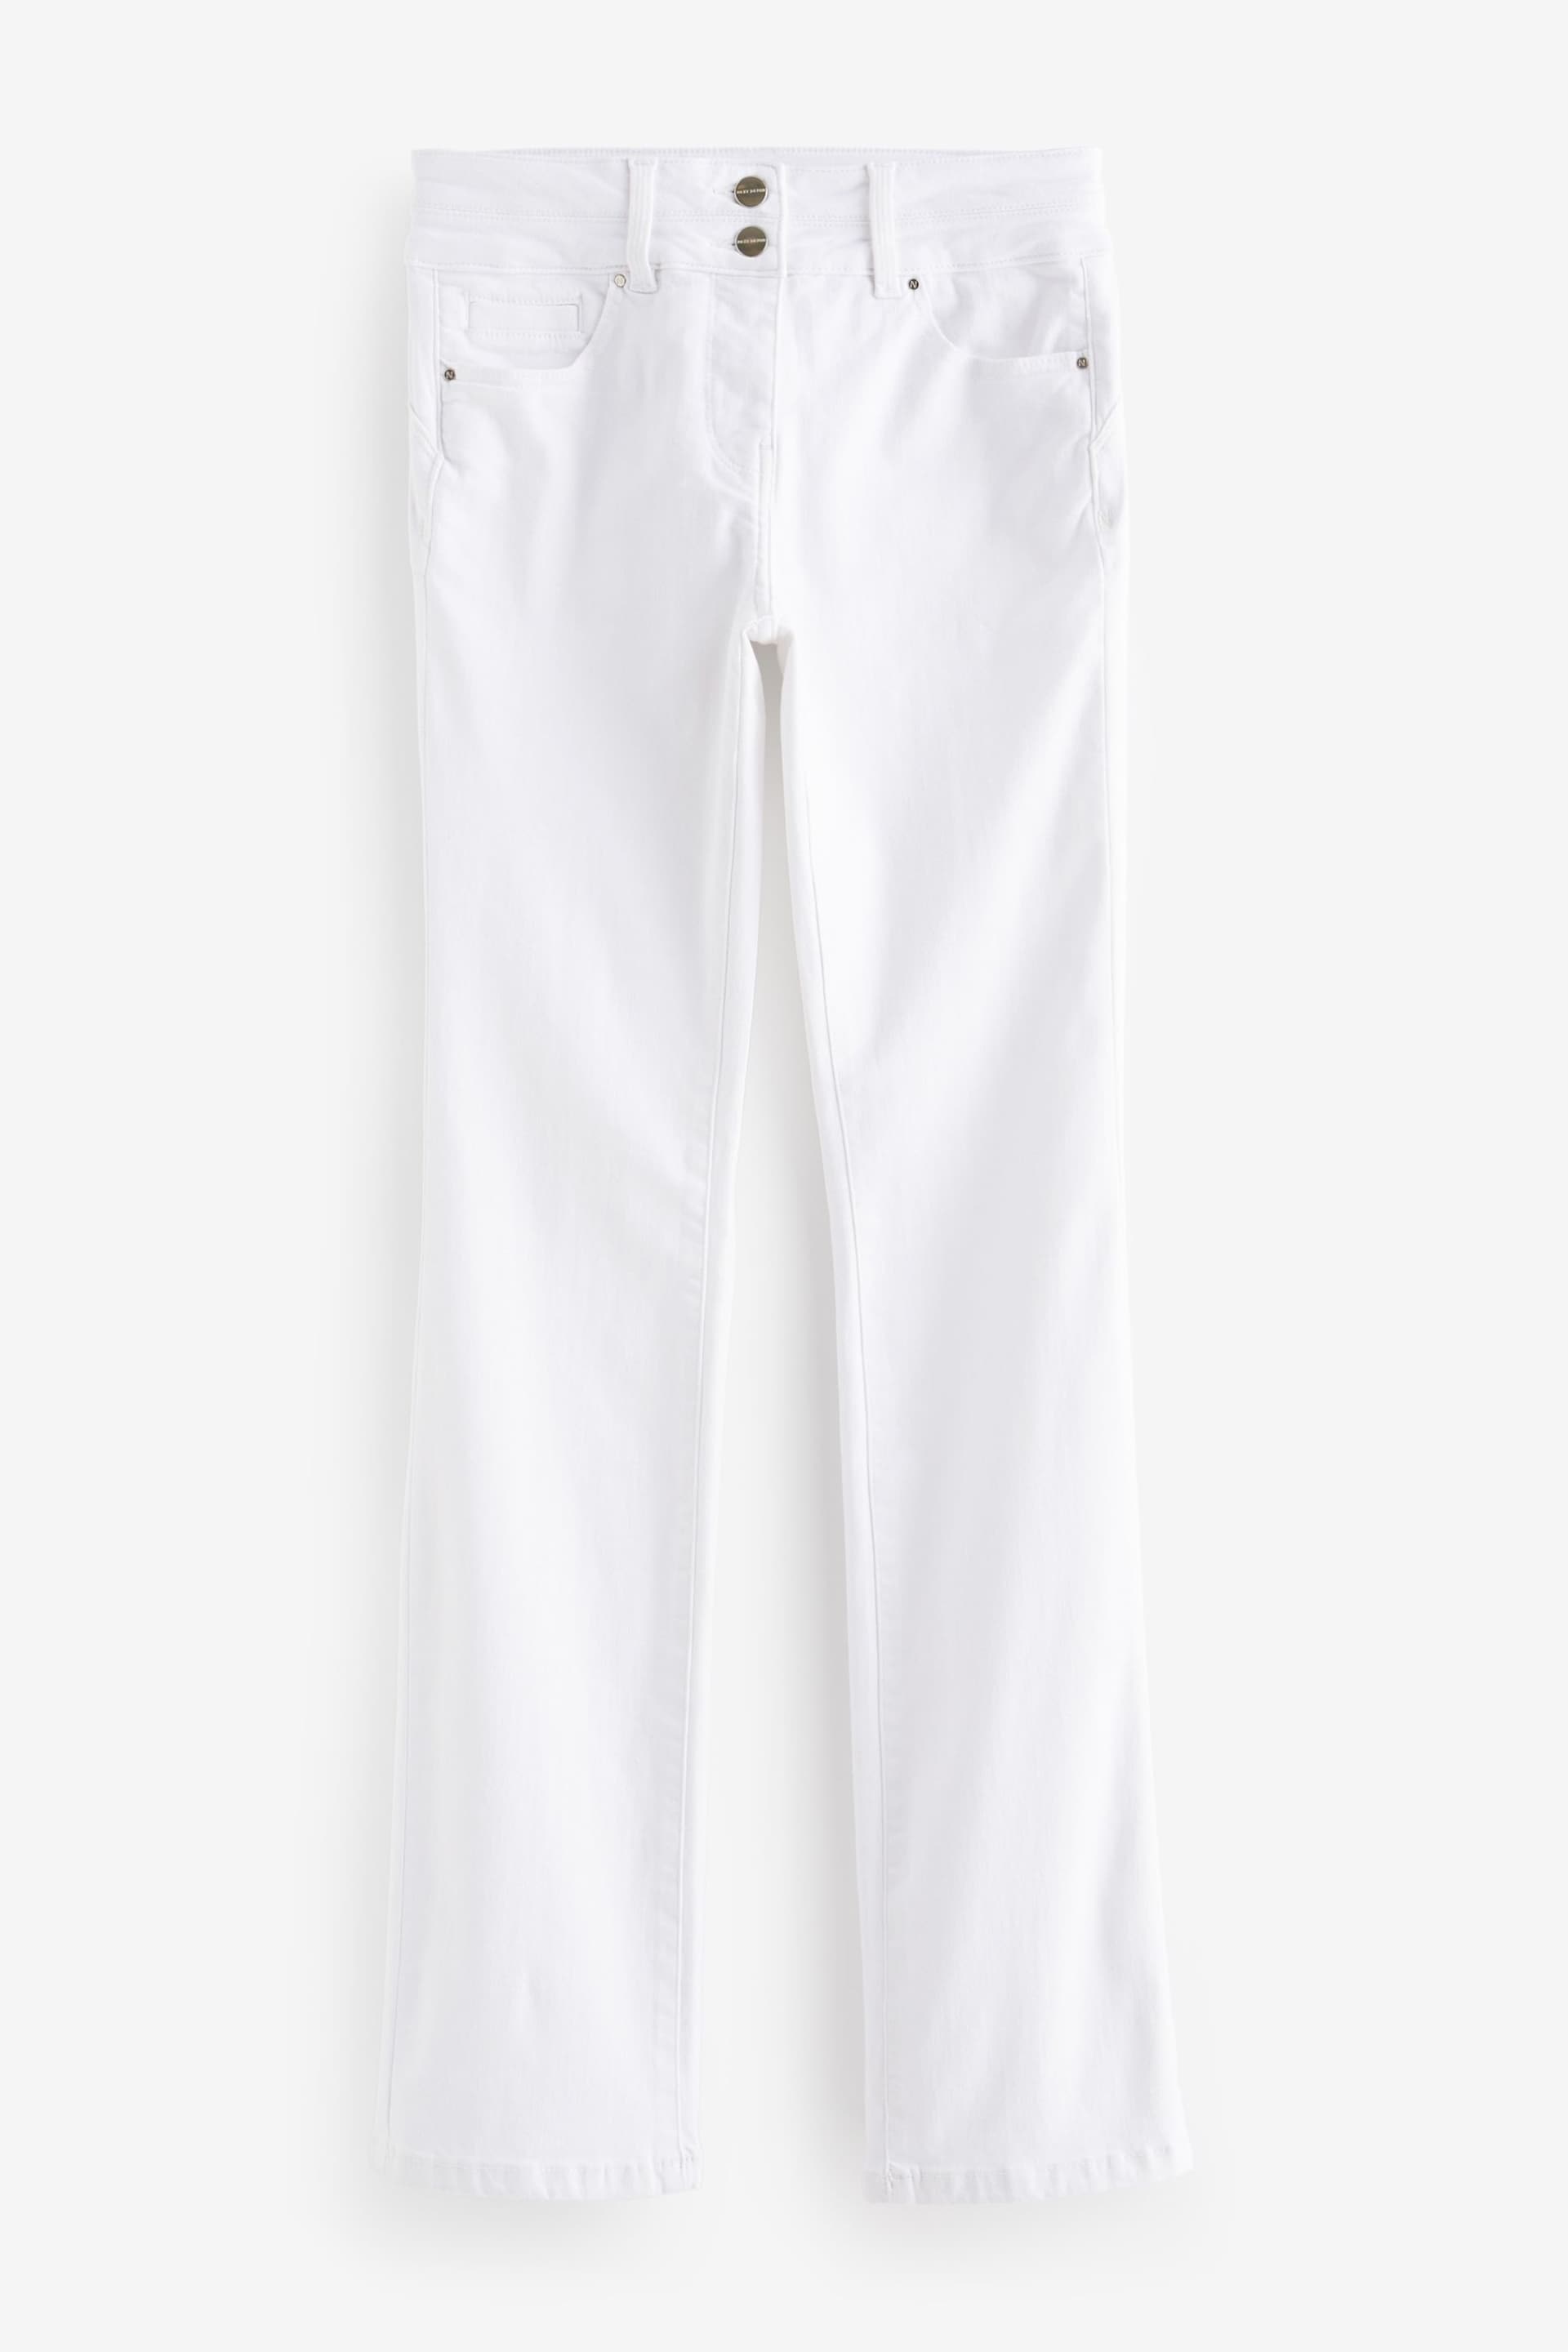 White Slim Lift And Shape Bootcut Jeans - Image 5 of 6